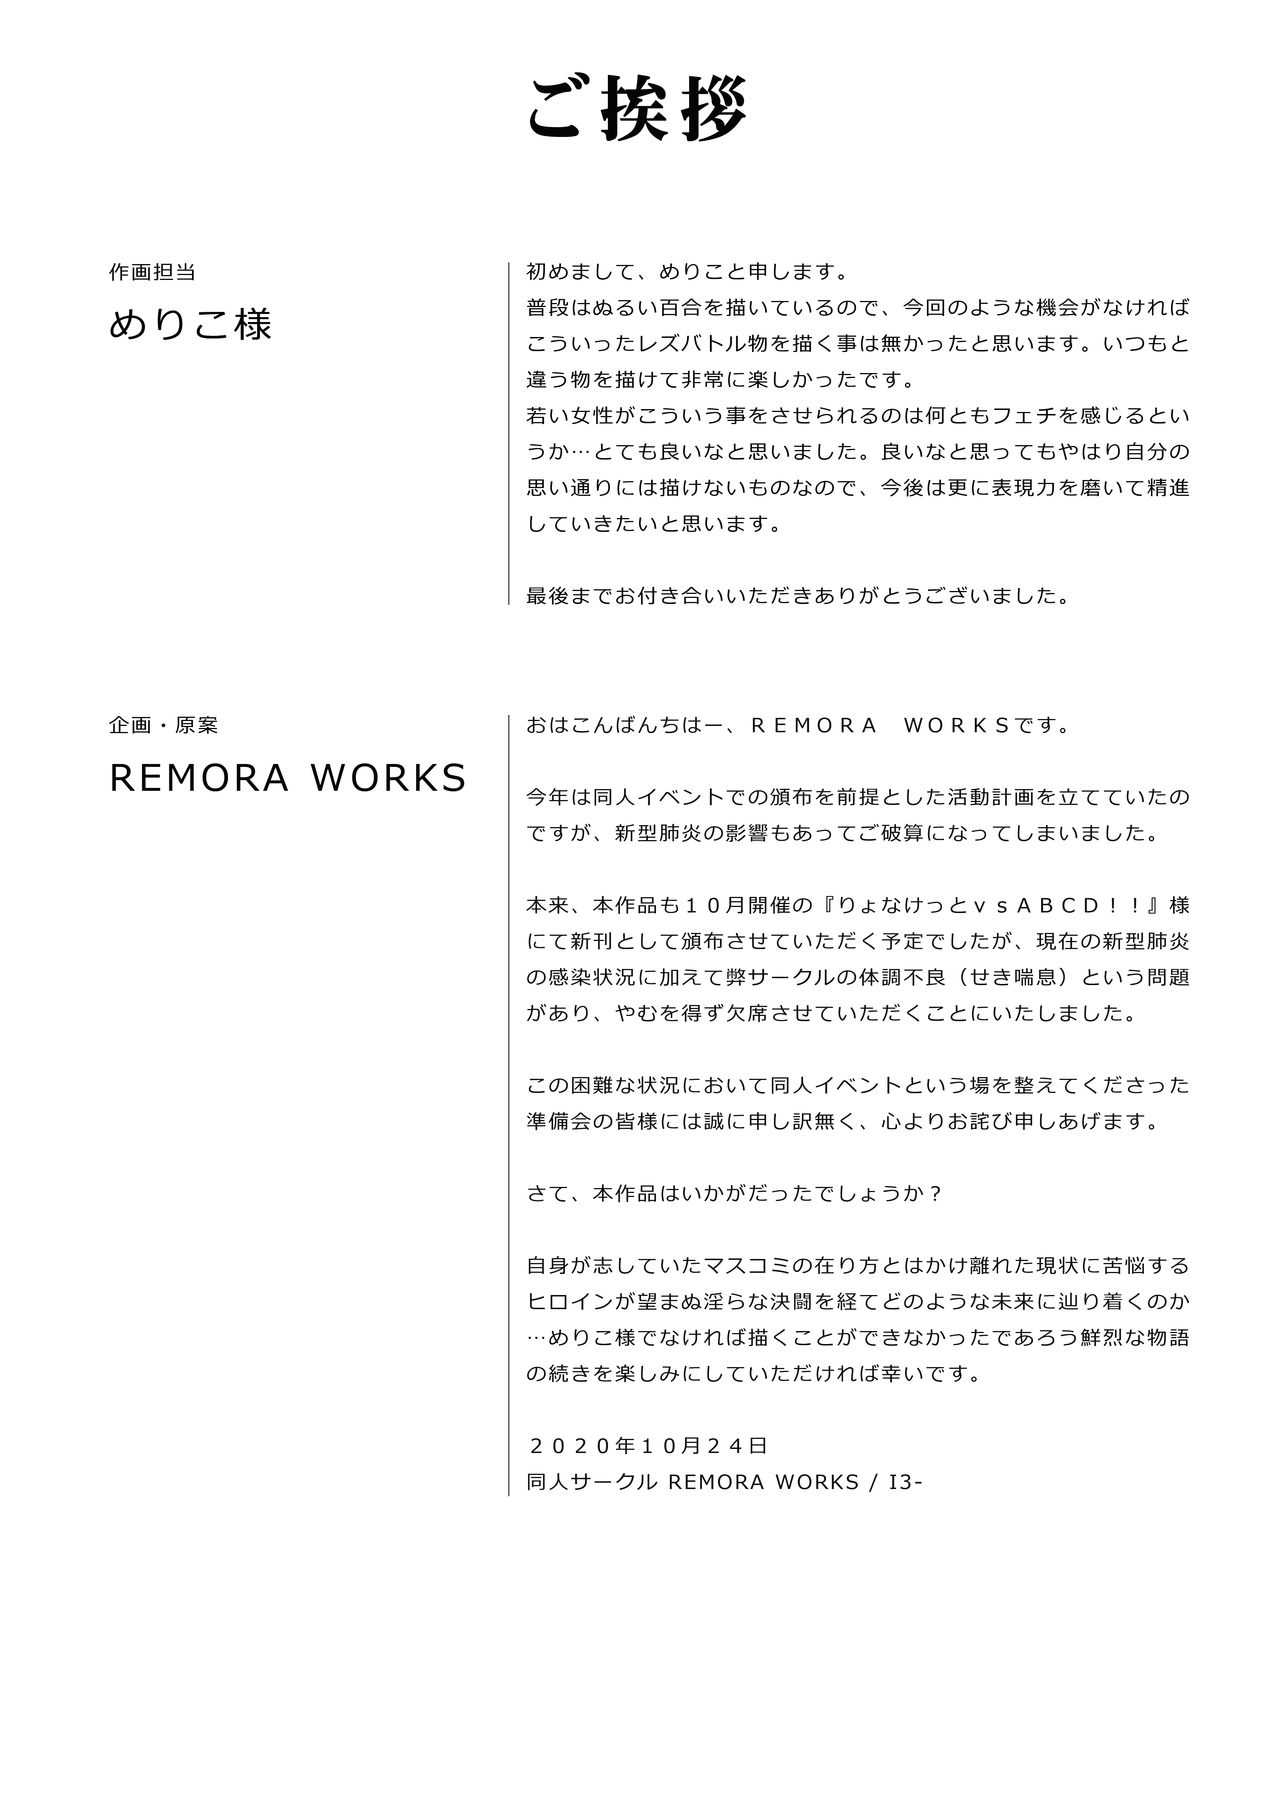 [Remora Works (めりこ)] LESFES CO -CANDID REPORTING- VOL.001